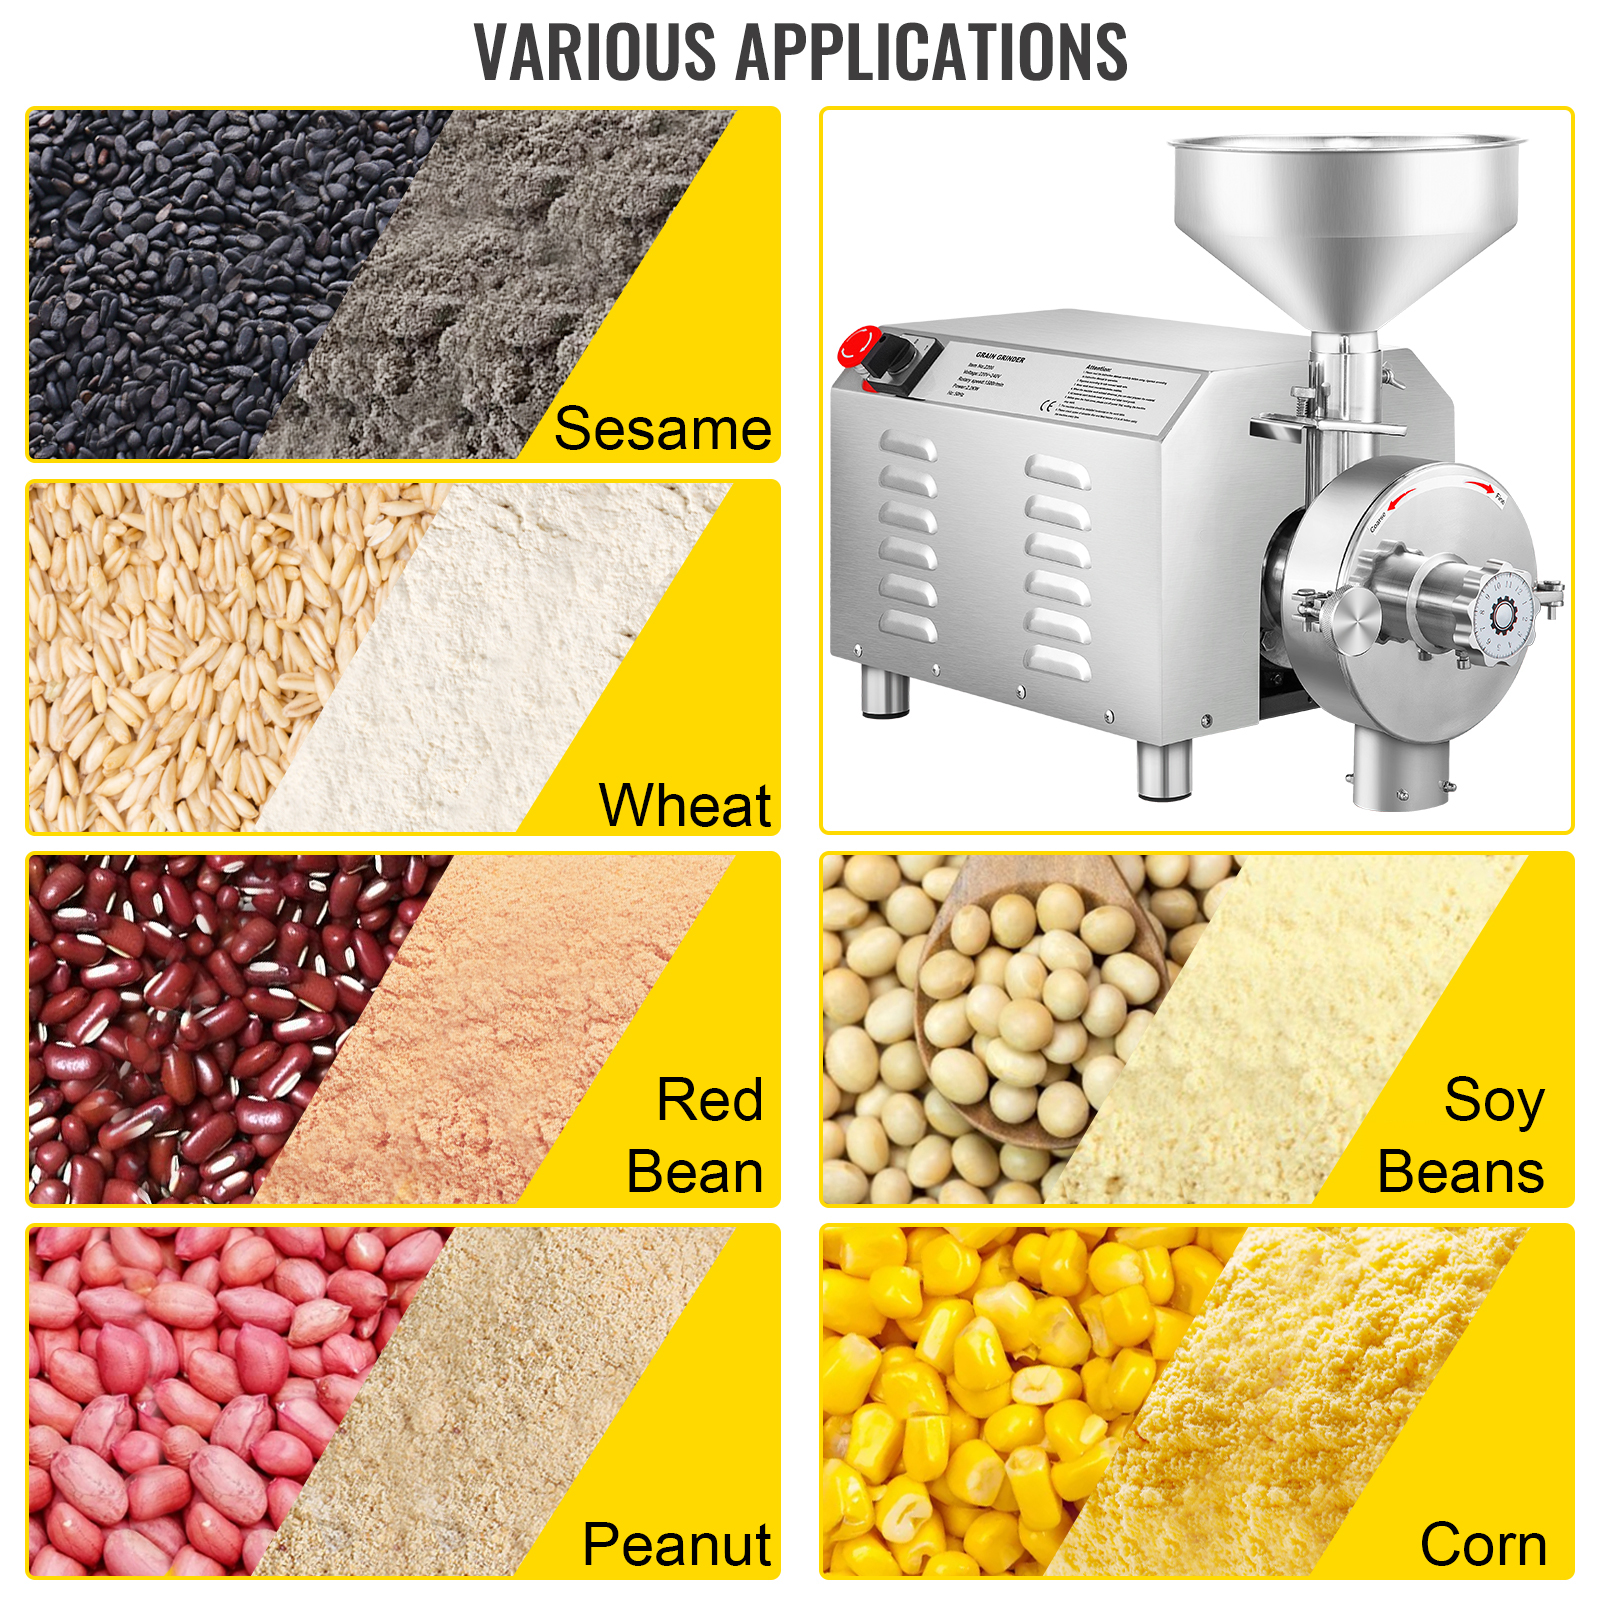 VEVOR 2500g Electric Grain Mill Grinder 3750W High-Speed Commercial Spice Grinders Stainless Steel Swing Type Pulverizer Powder Machine for Spices